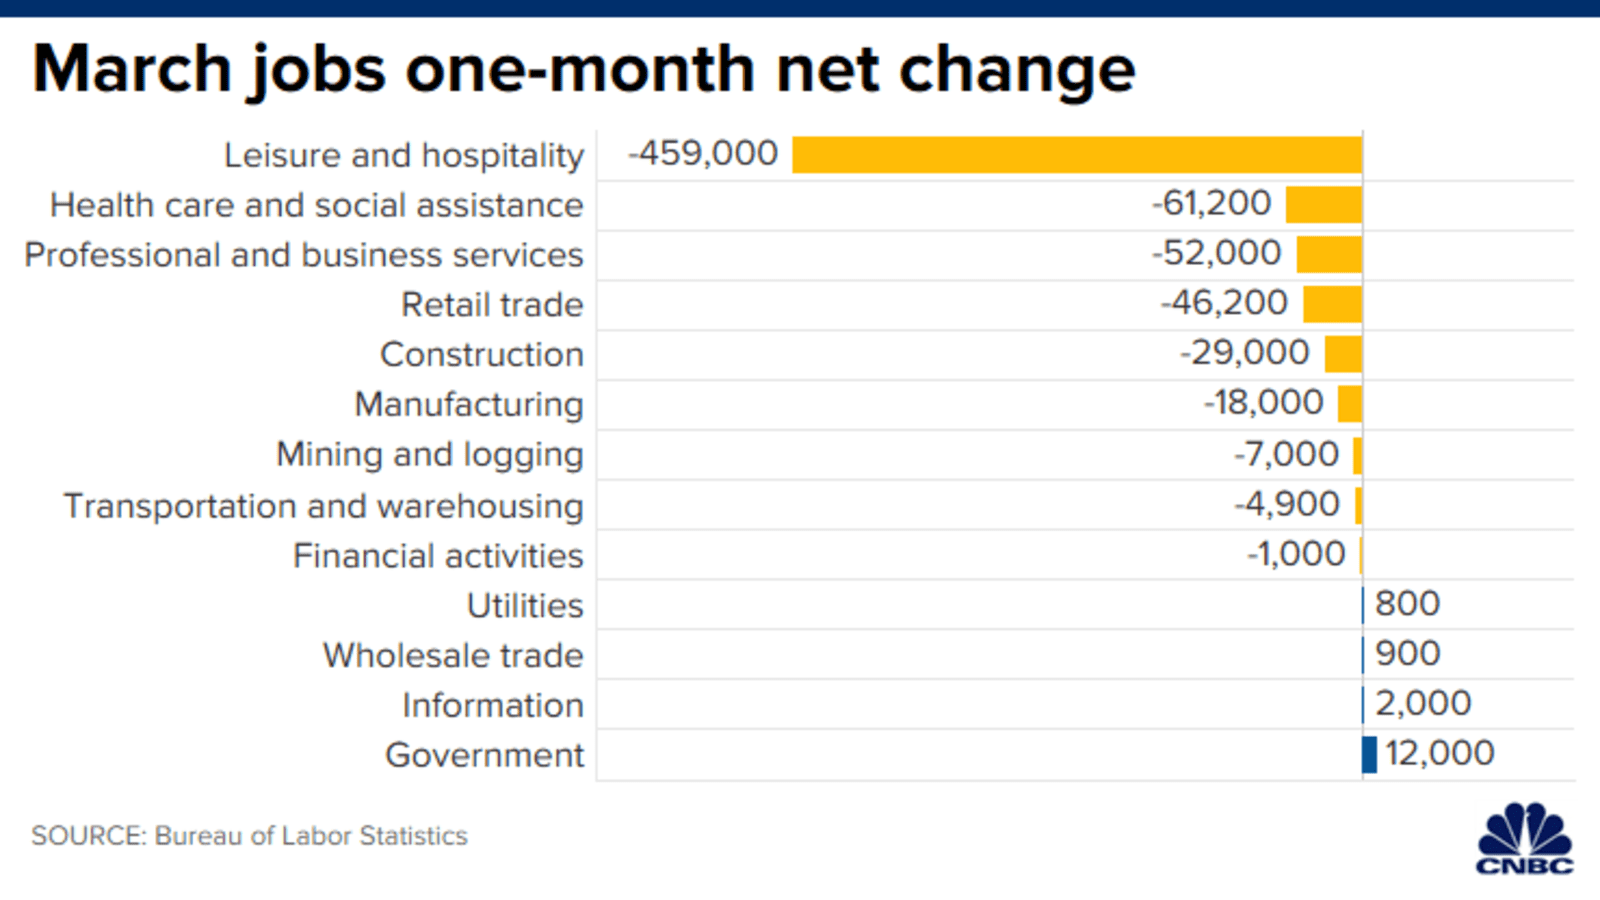 This chart shows which industries saw big job losses in March 2020